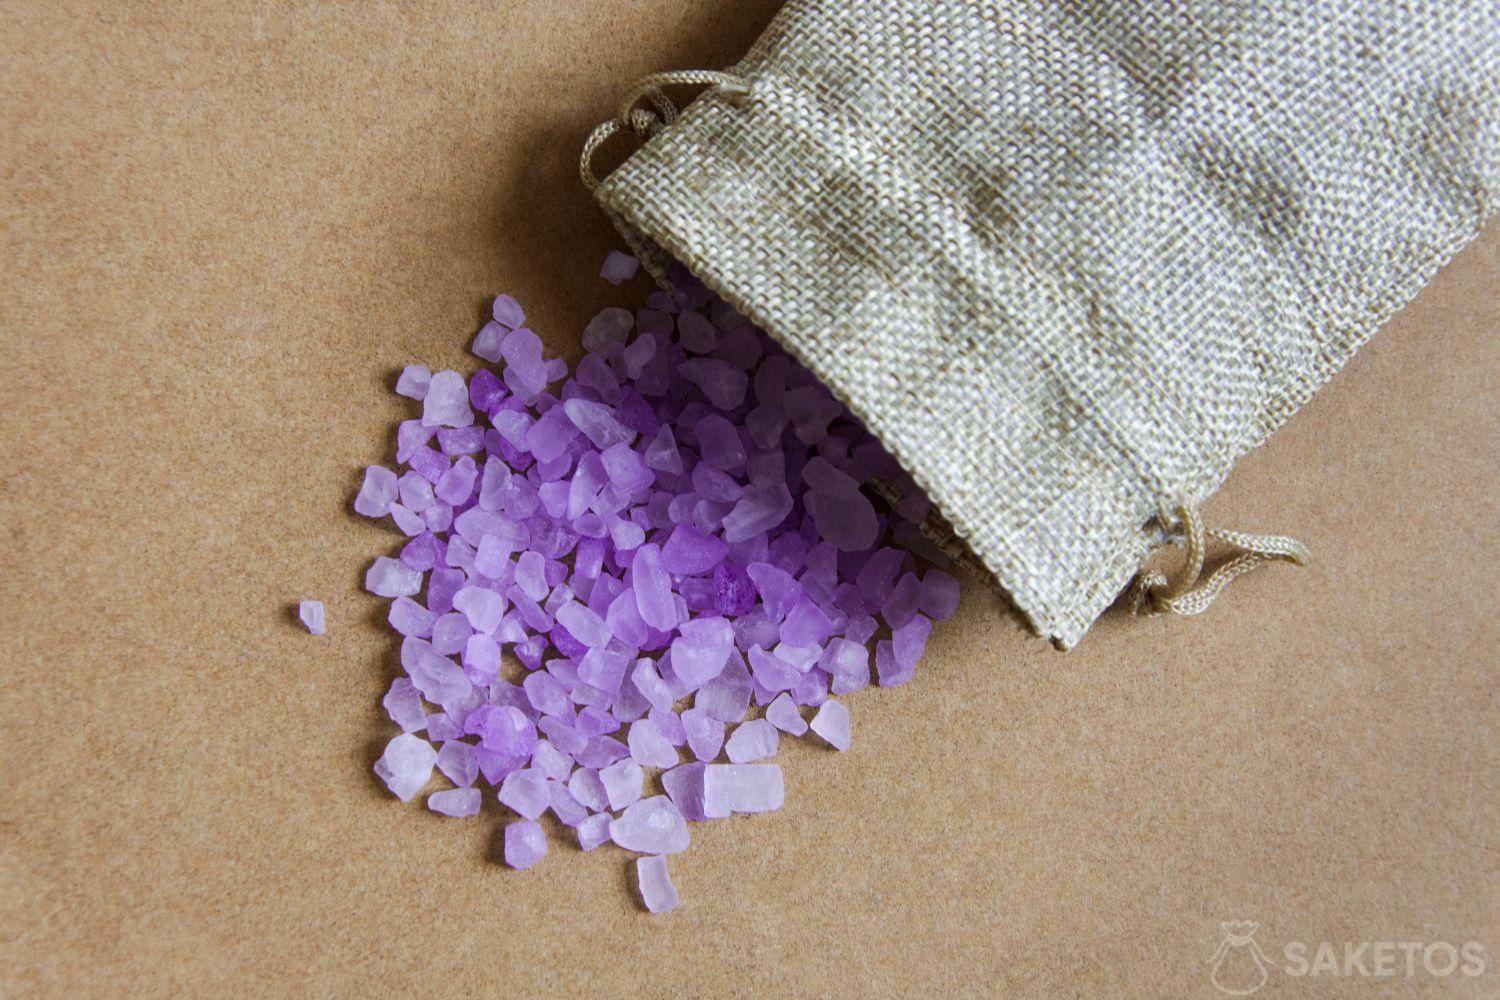 Silica gel is the ideal solution when you want to get rid of moisture from your shoes!